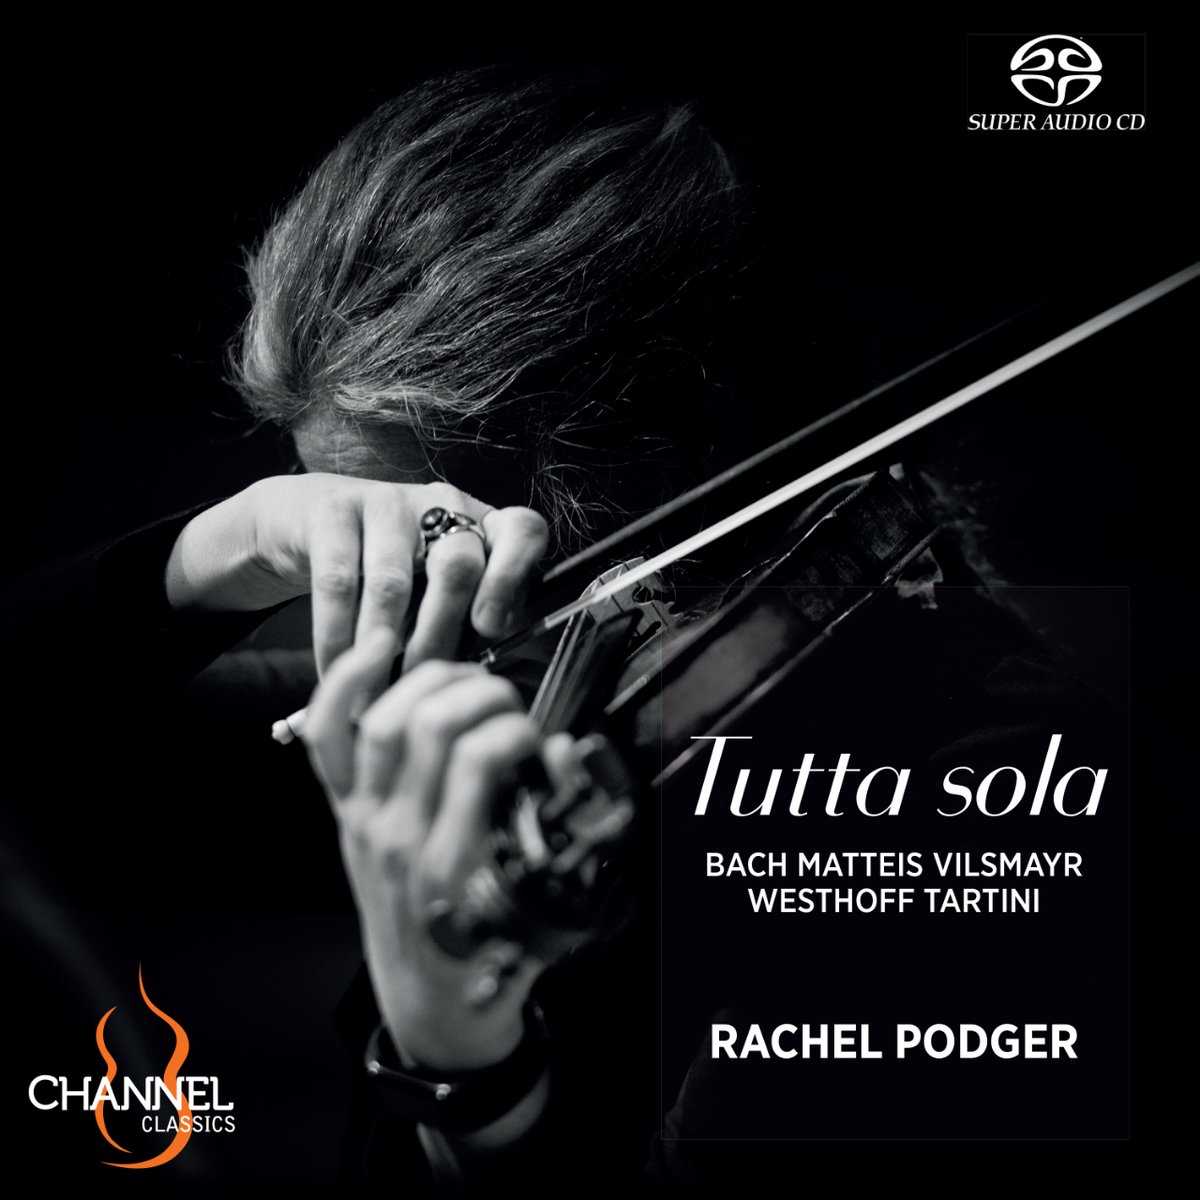 Our Patron @RachPodger releases a new album today! 💿 Tutta Sola features solo baroque violin music from JS Bach, Vilsmayr, Matteis the Younger, Westhoff and Tartini 🎵 Get your copy here: prestomusic.com/classical/prod… 🎻